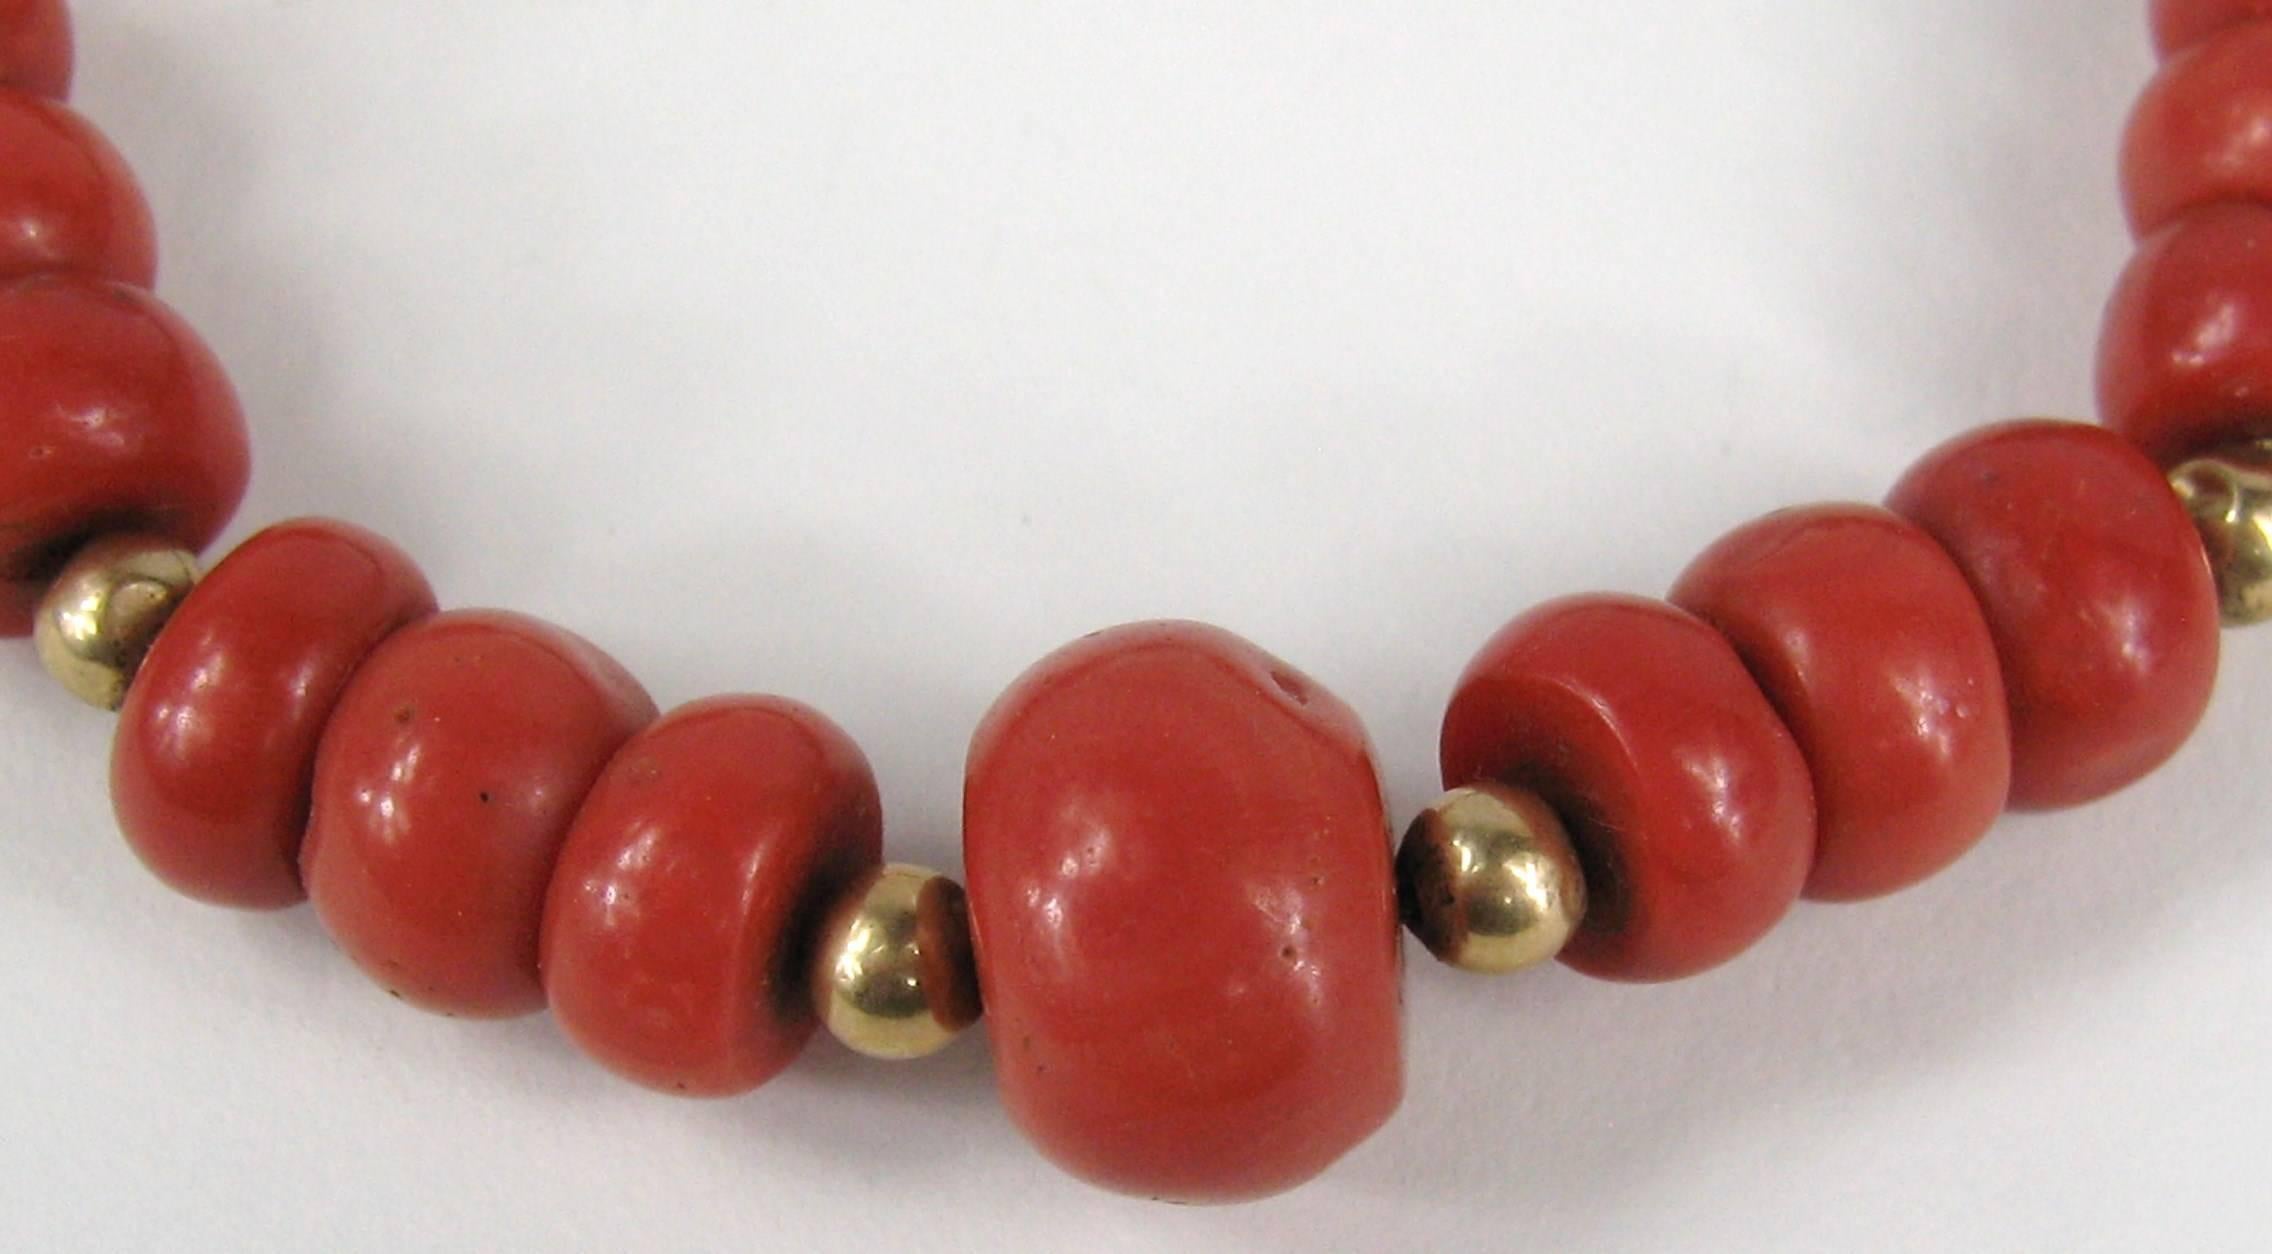 Special Natural Mediterranean Coral Beaded Bracelet with a lovely enameled slide-in clasp. GIA Identification report No. 2181344399 Reddish Orange Natural Coral Not treated. Will fit a 6.5 up to a 7.5 wrist nicely depending on how you like to wear